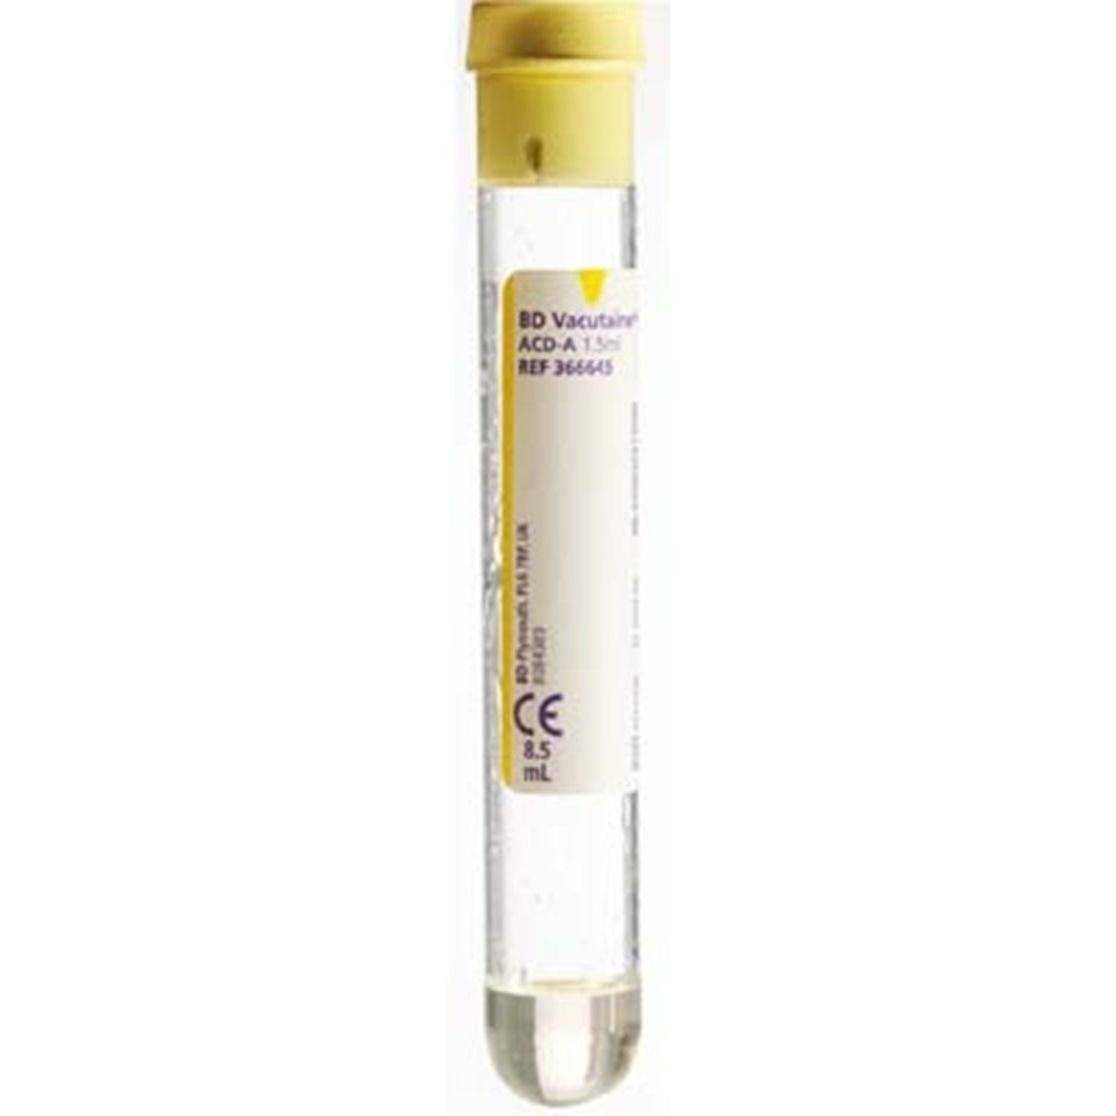 BD Vacutainer 8.5ml ACD-A  Yellow Blood Collection Tubes - UKMEDI